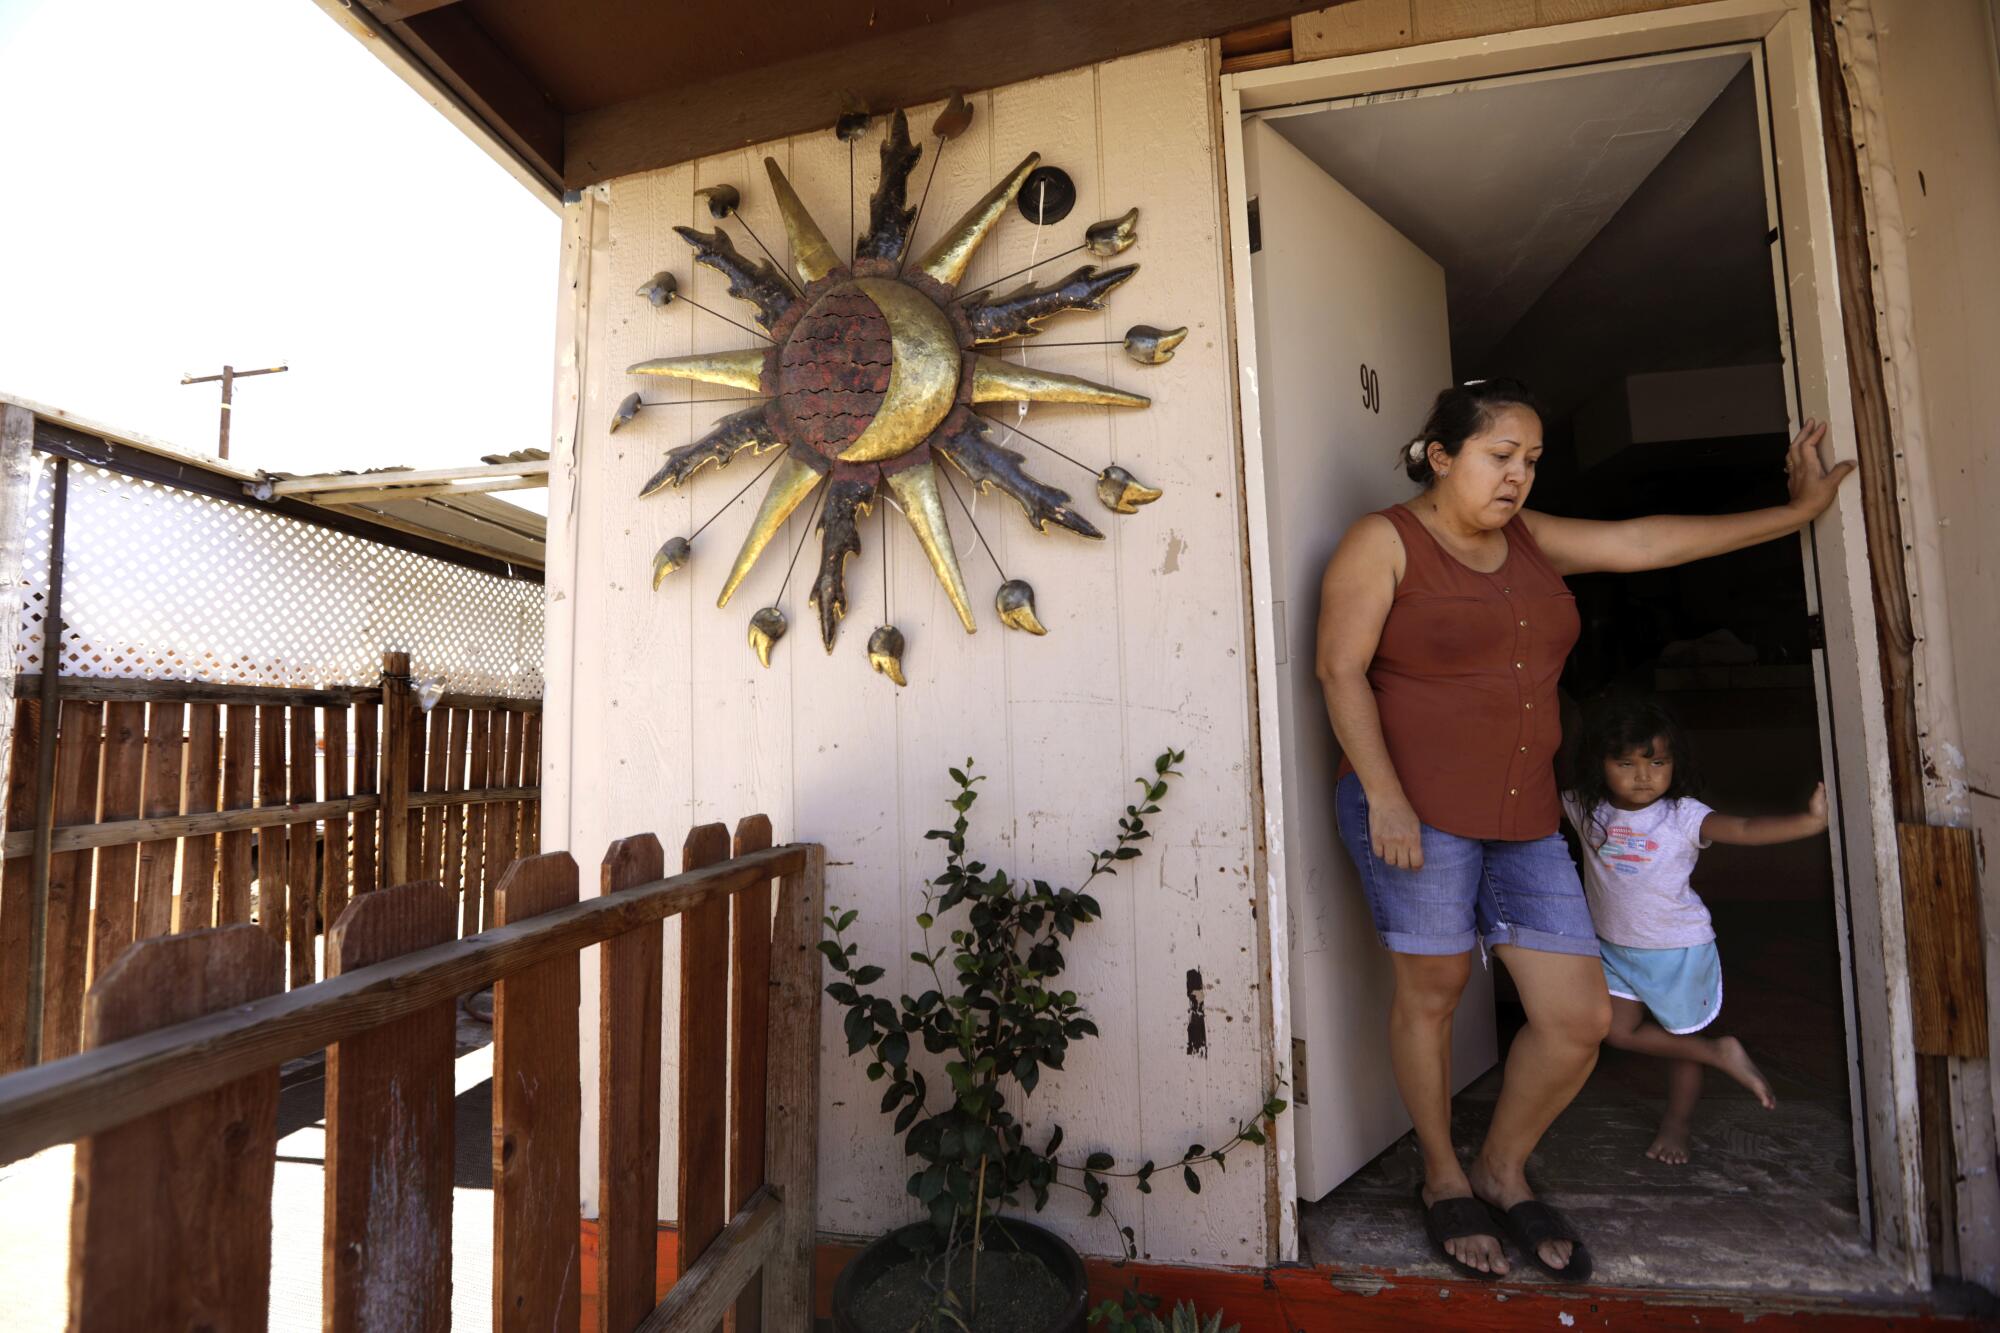 Emma Duarte and her daughter stand in the doorway of their mobile home